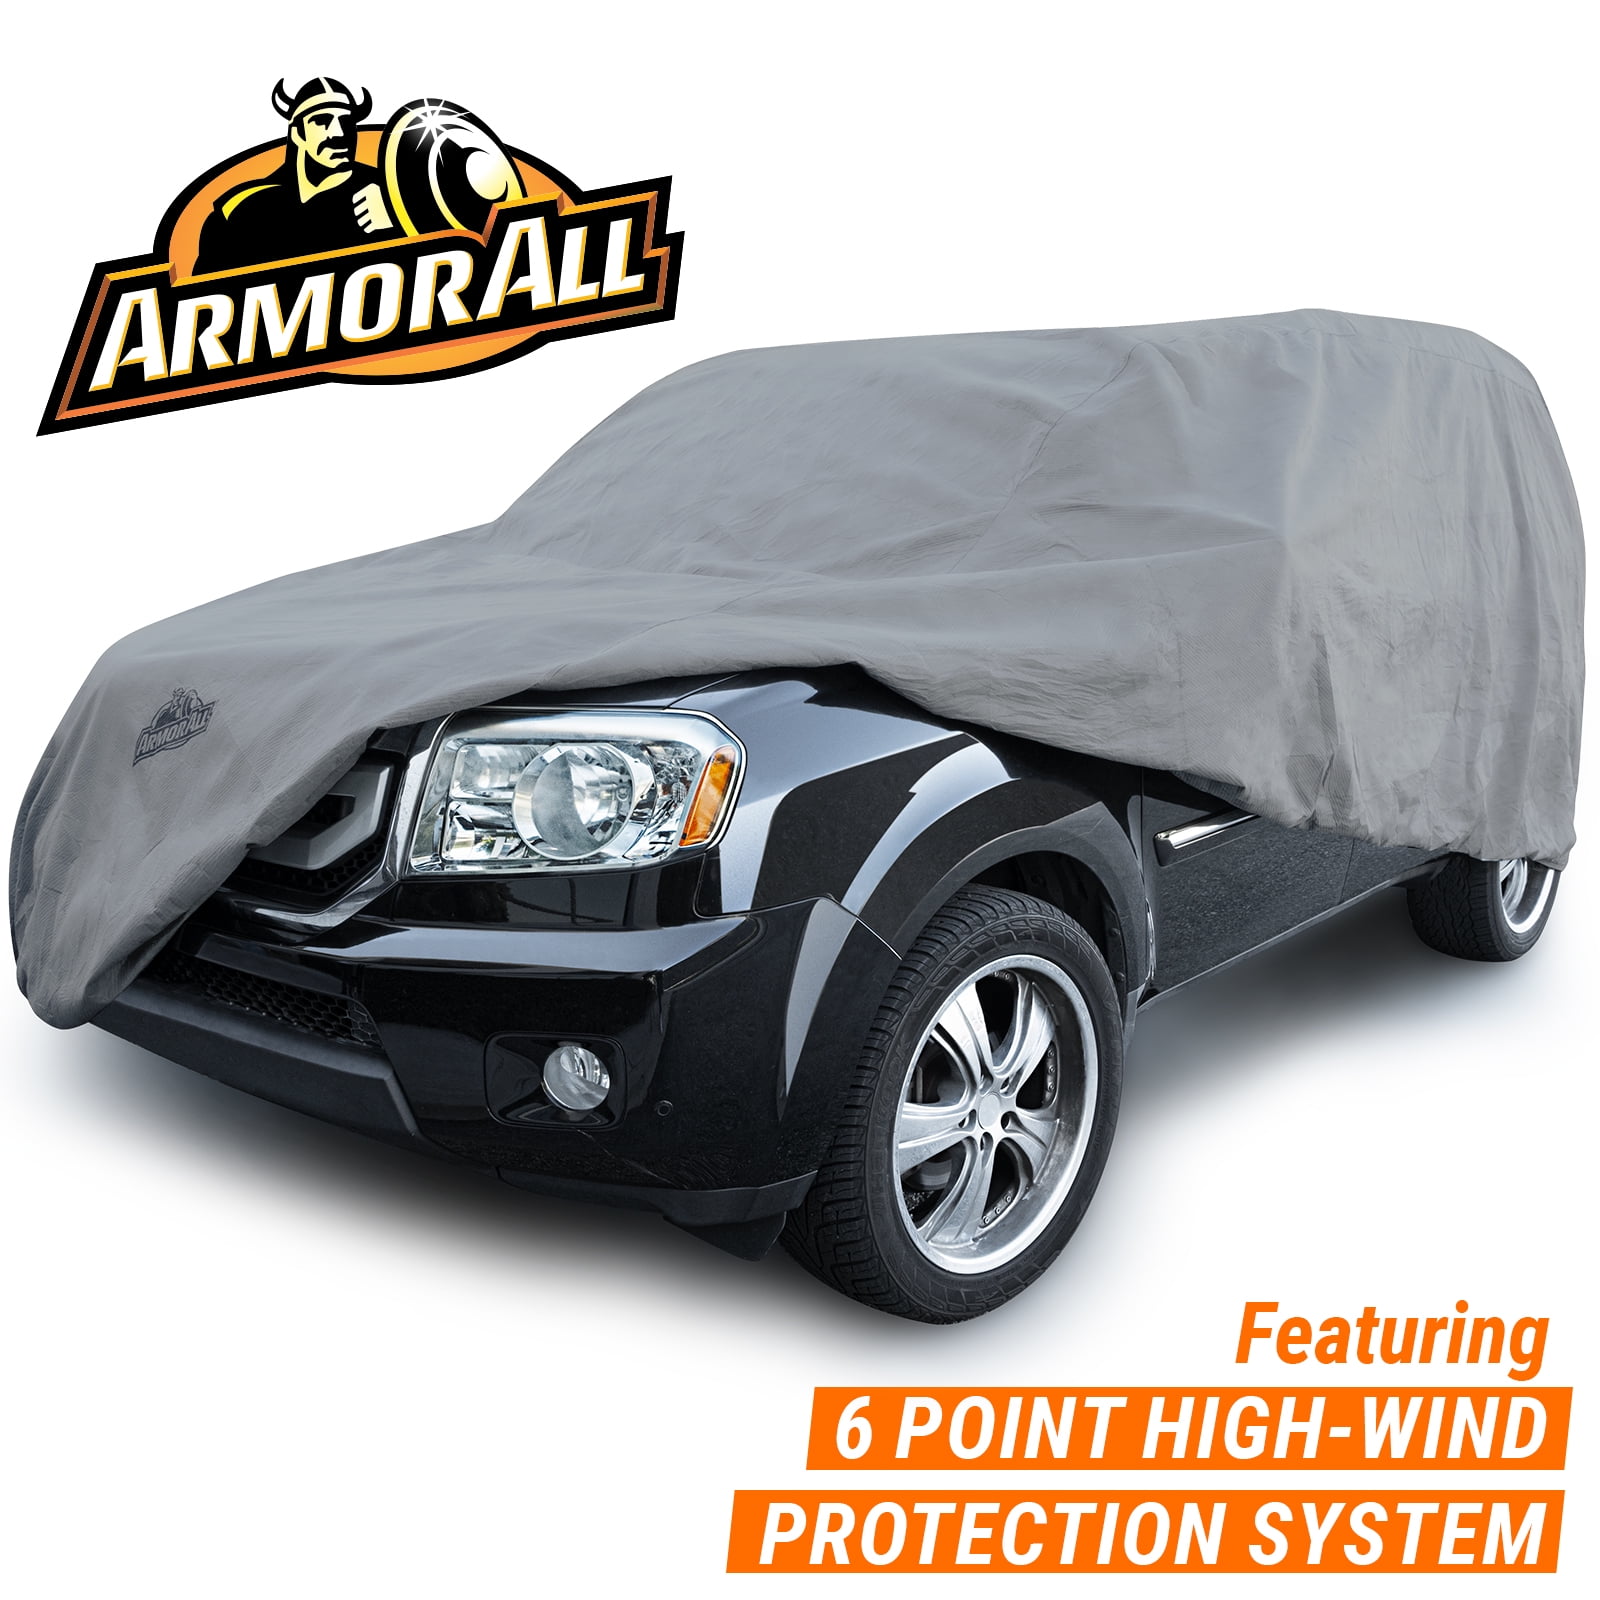 Armor All SUV Cover, Heavy Duty All Weather Protection, Fits SUVs Length up  to 205